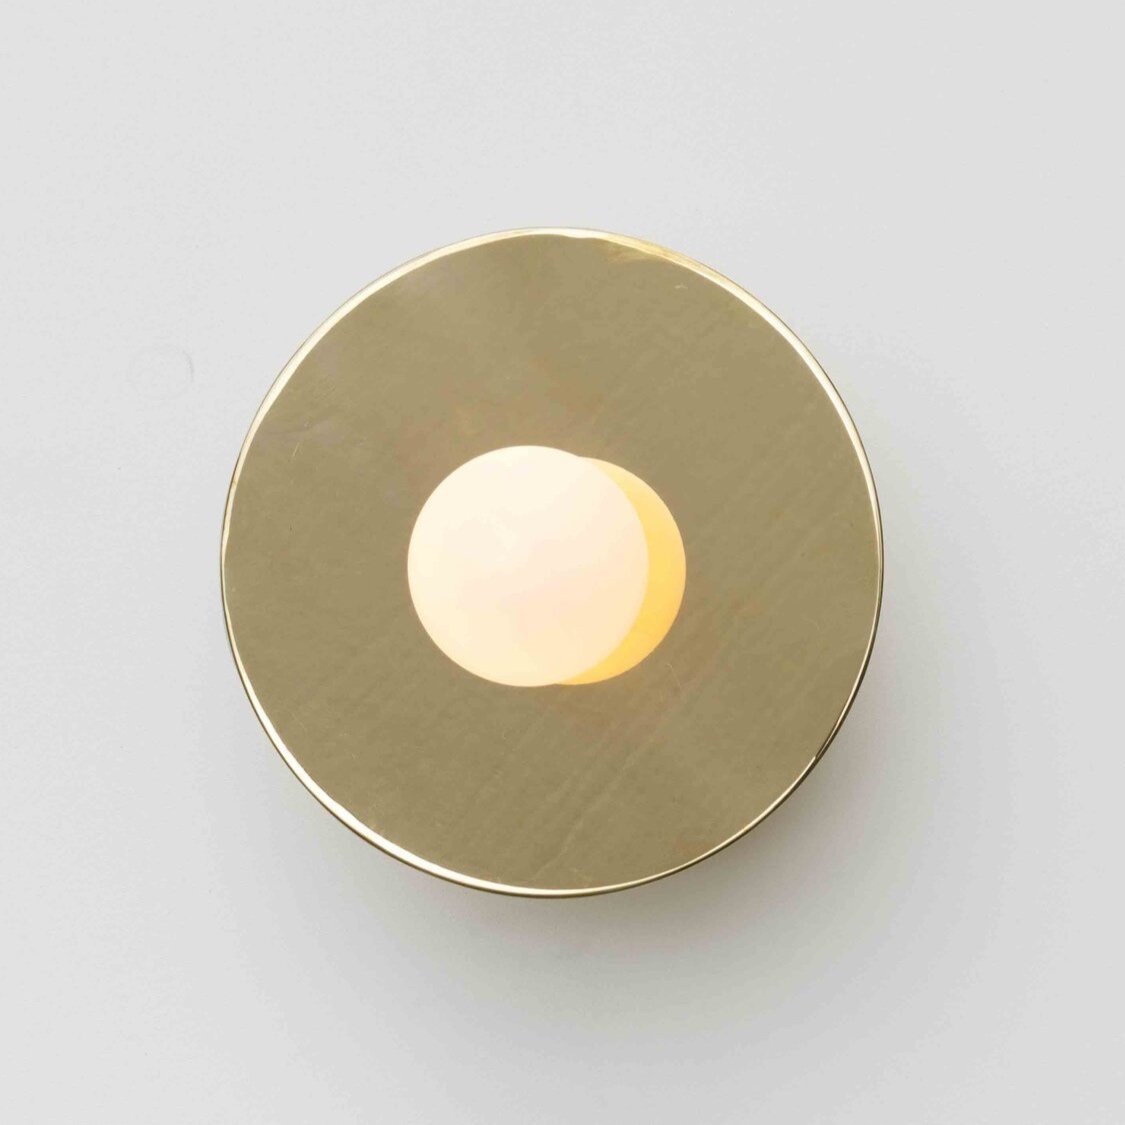 DISC AND SPHERE WALL LIGHT / POLISHED BRASS